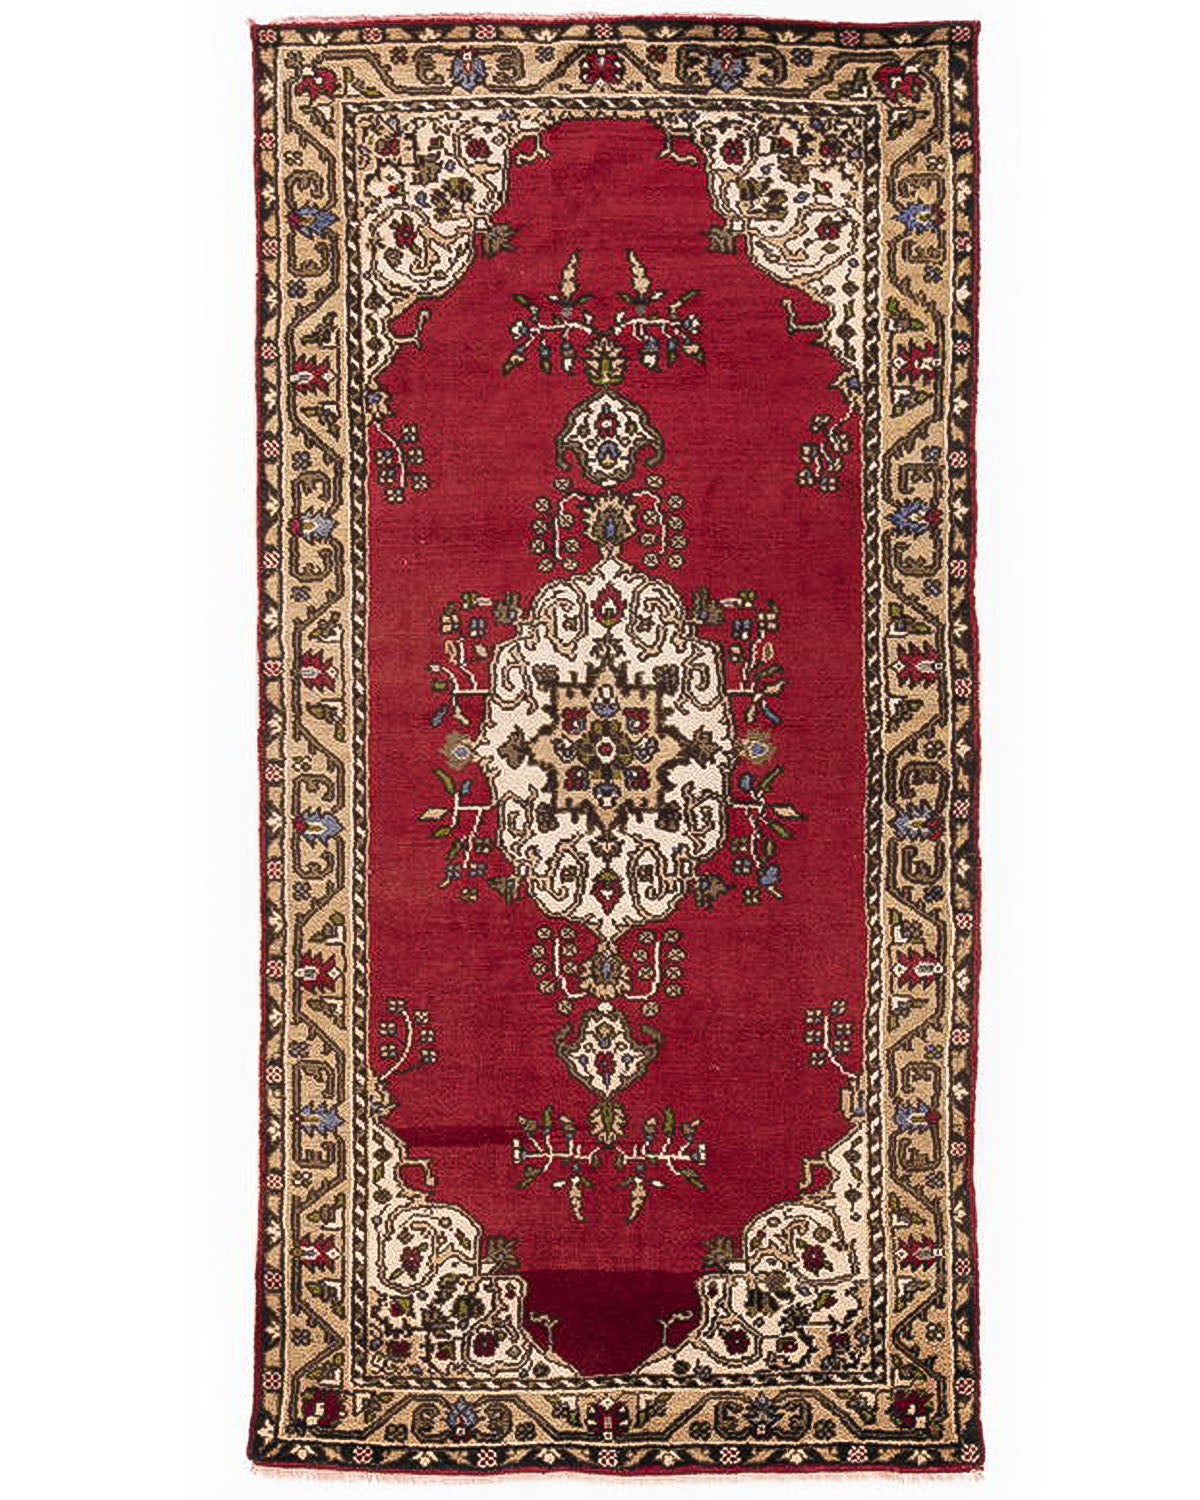 Oriental Rug Anatolian Hand Knotted Wool On Cotton 142 X 282 Cm - 4' 8'' X 9' 4'' Red C014 ER12